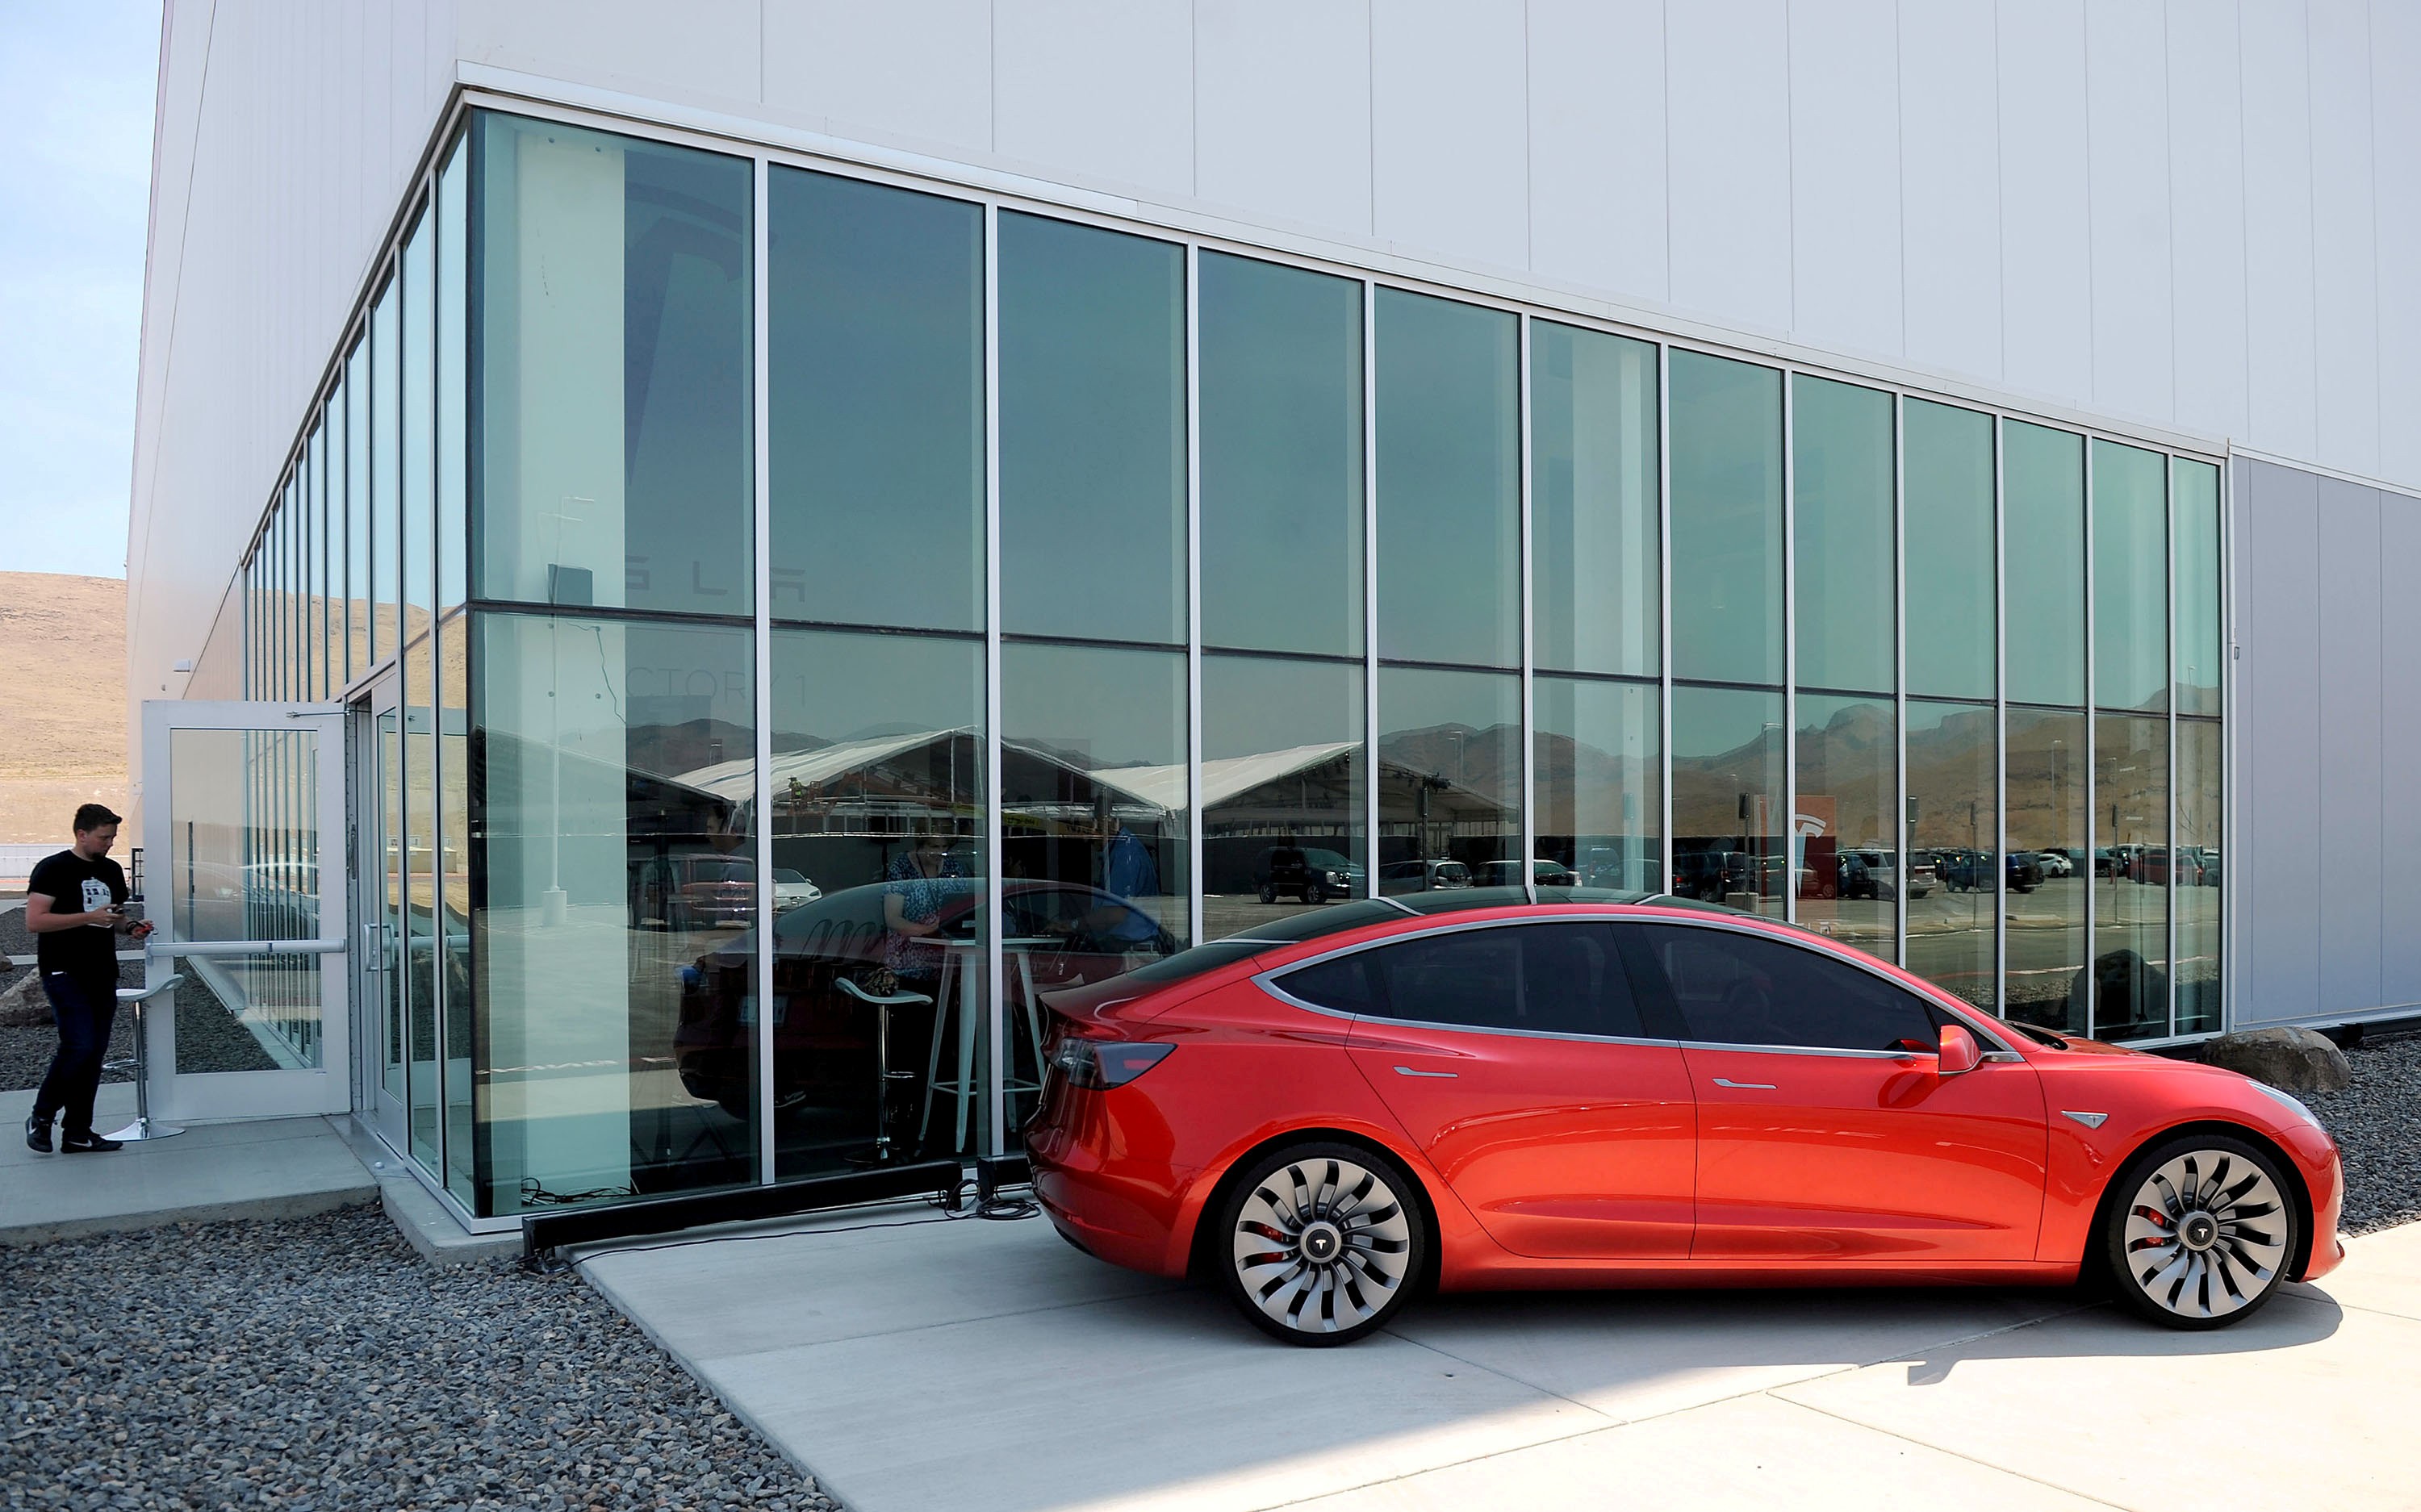 FILE PHOTO: A prototype of the Tesla Model 3 is on display in front of the factory during a media tour of the Tesla Gigafactory which will produce batteries for the electric carmaker in Sparks, Nevada, U.S. July 26, 2016. REUTERS/James Glover II/File Photo